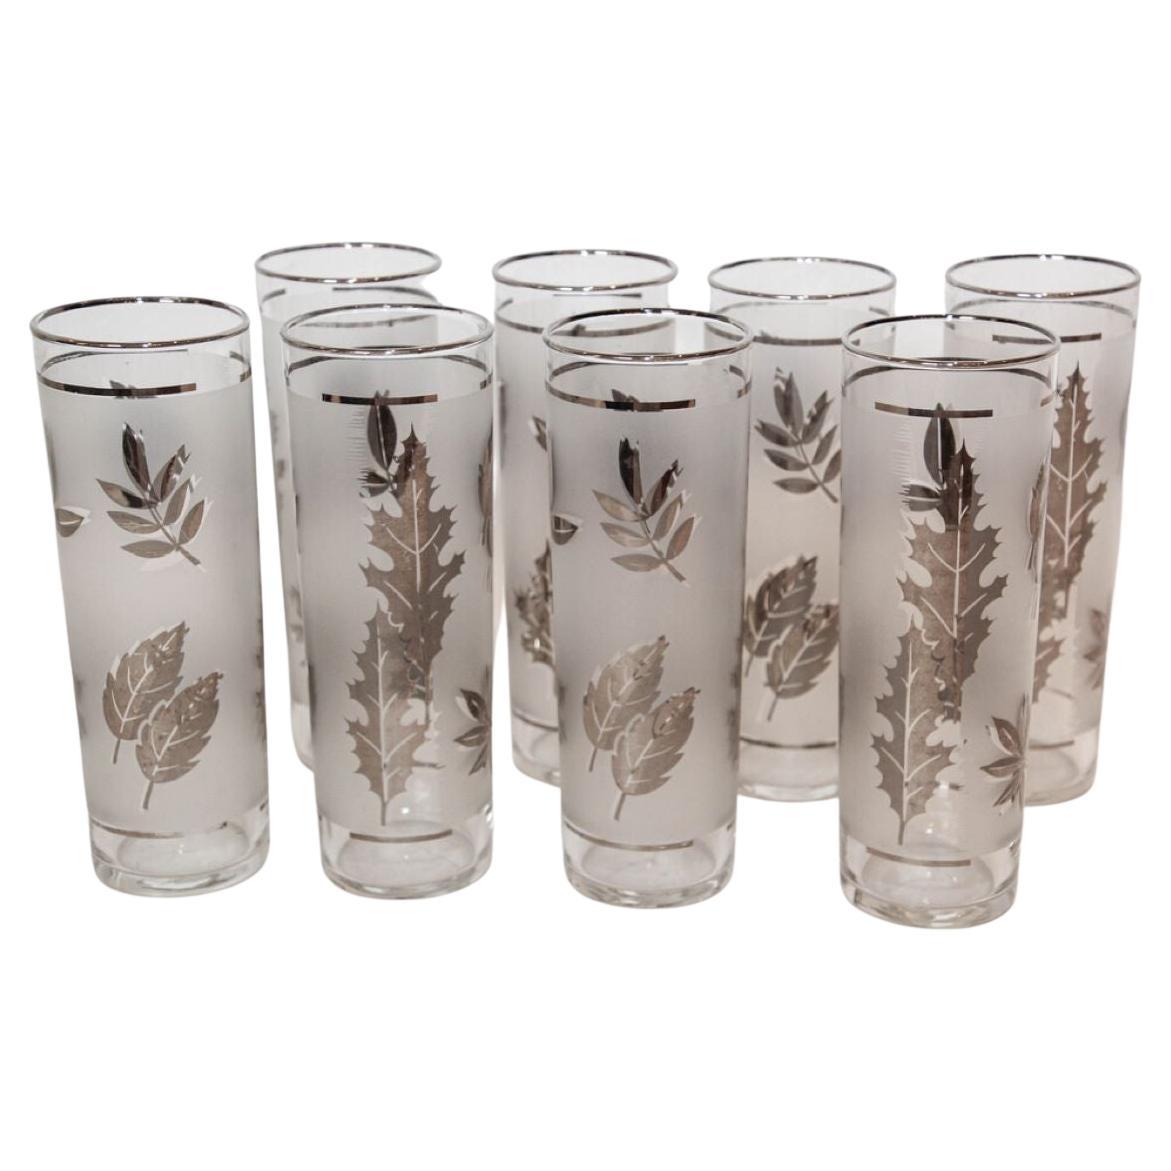 1950s Silver Foliage Highball Cocktail Glasses by Libbey Glass Co Set of 8